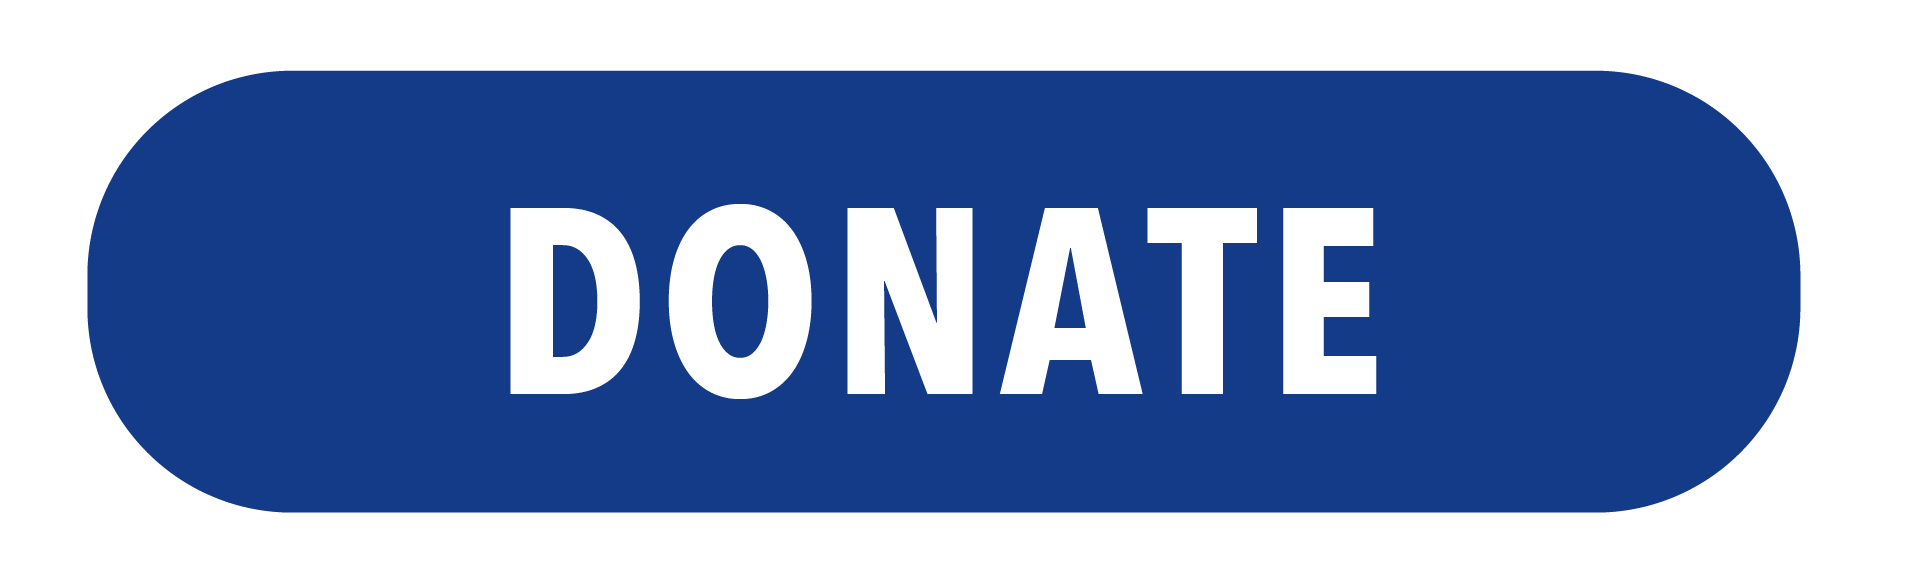 PayPal Donation Button